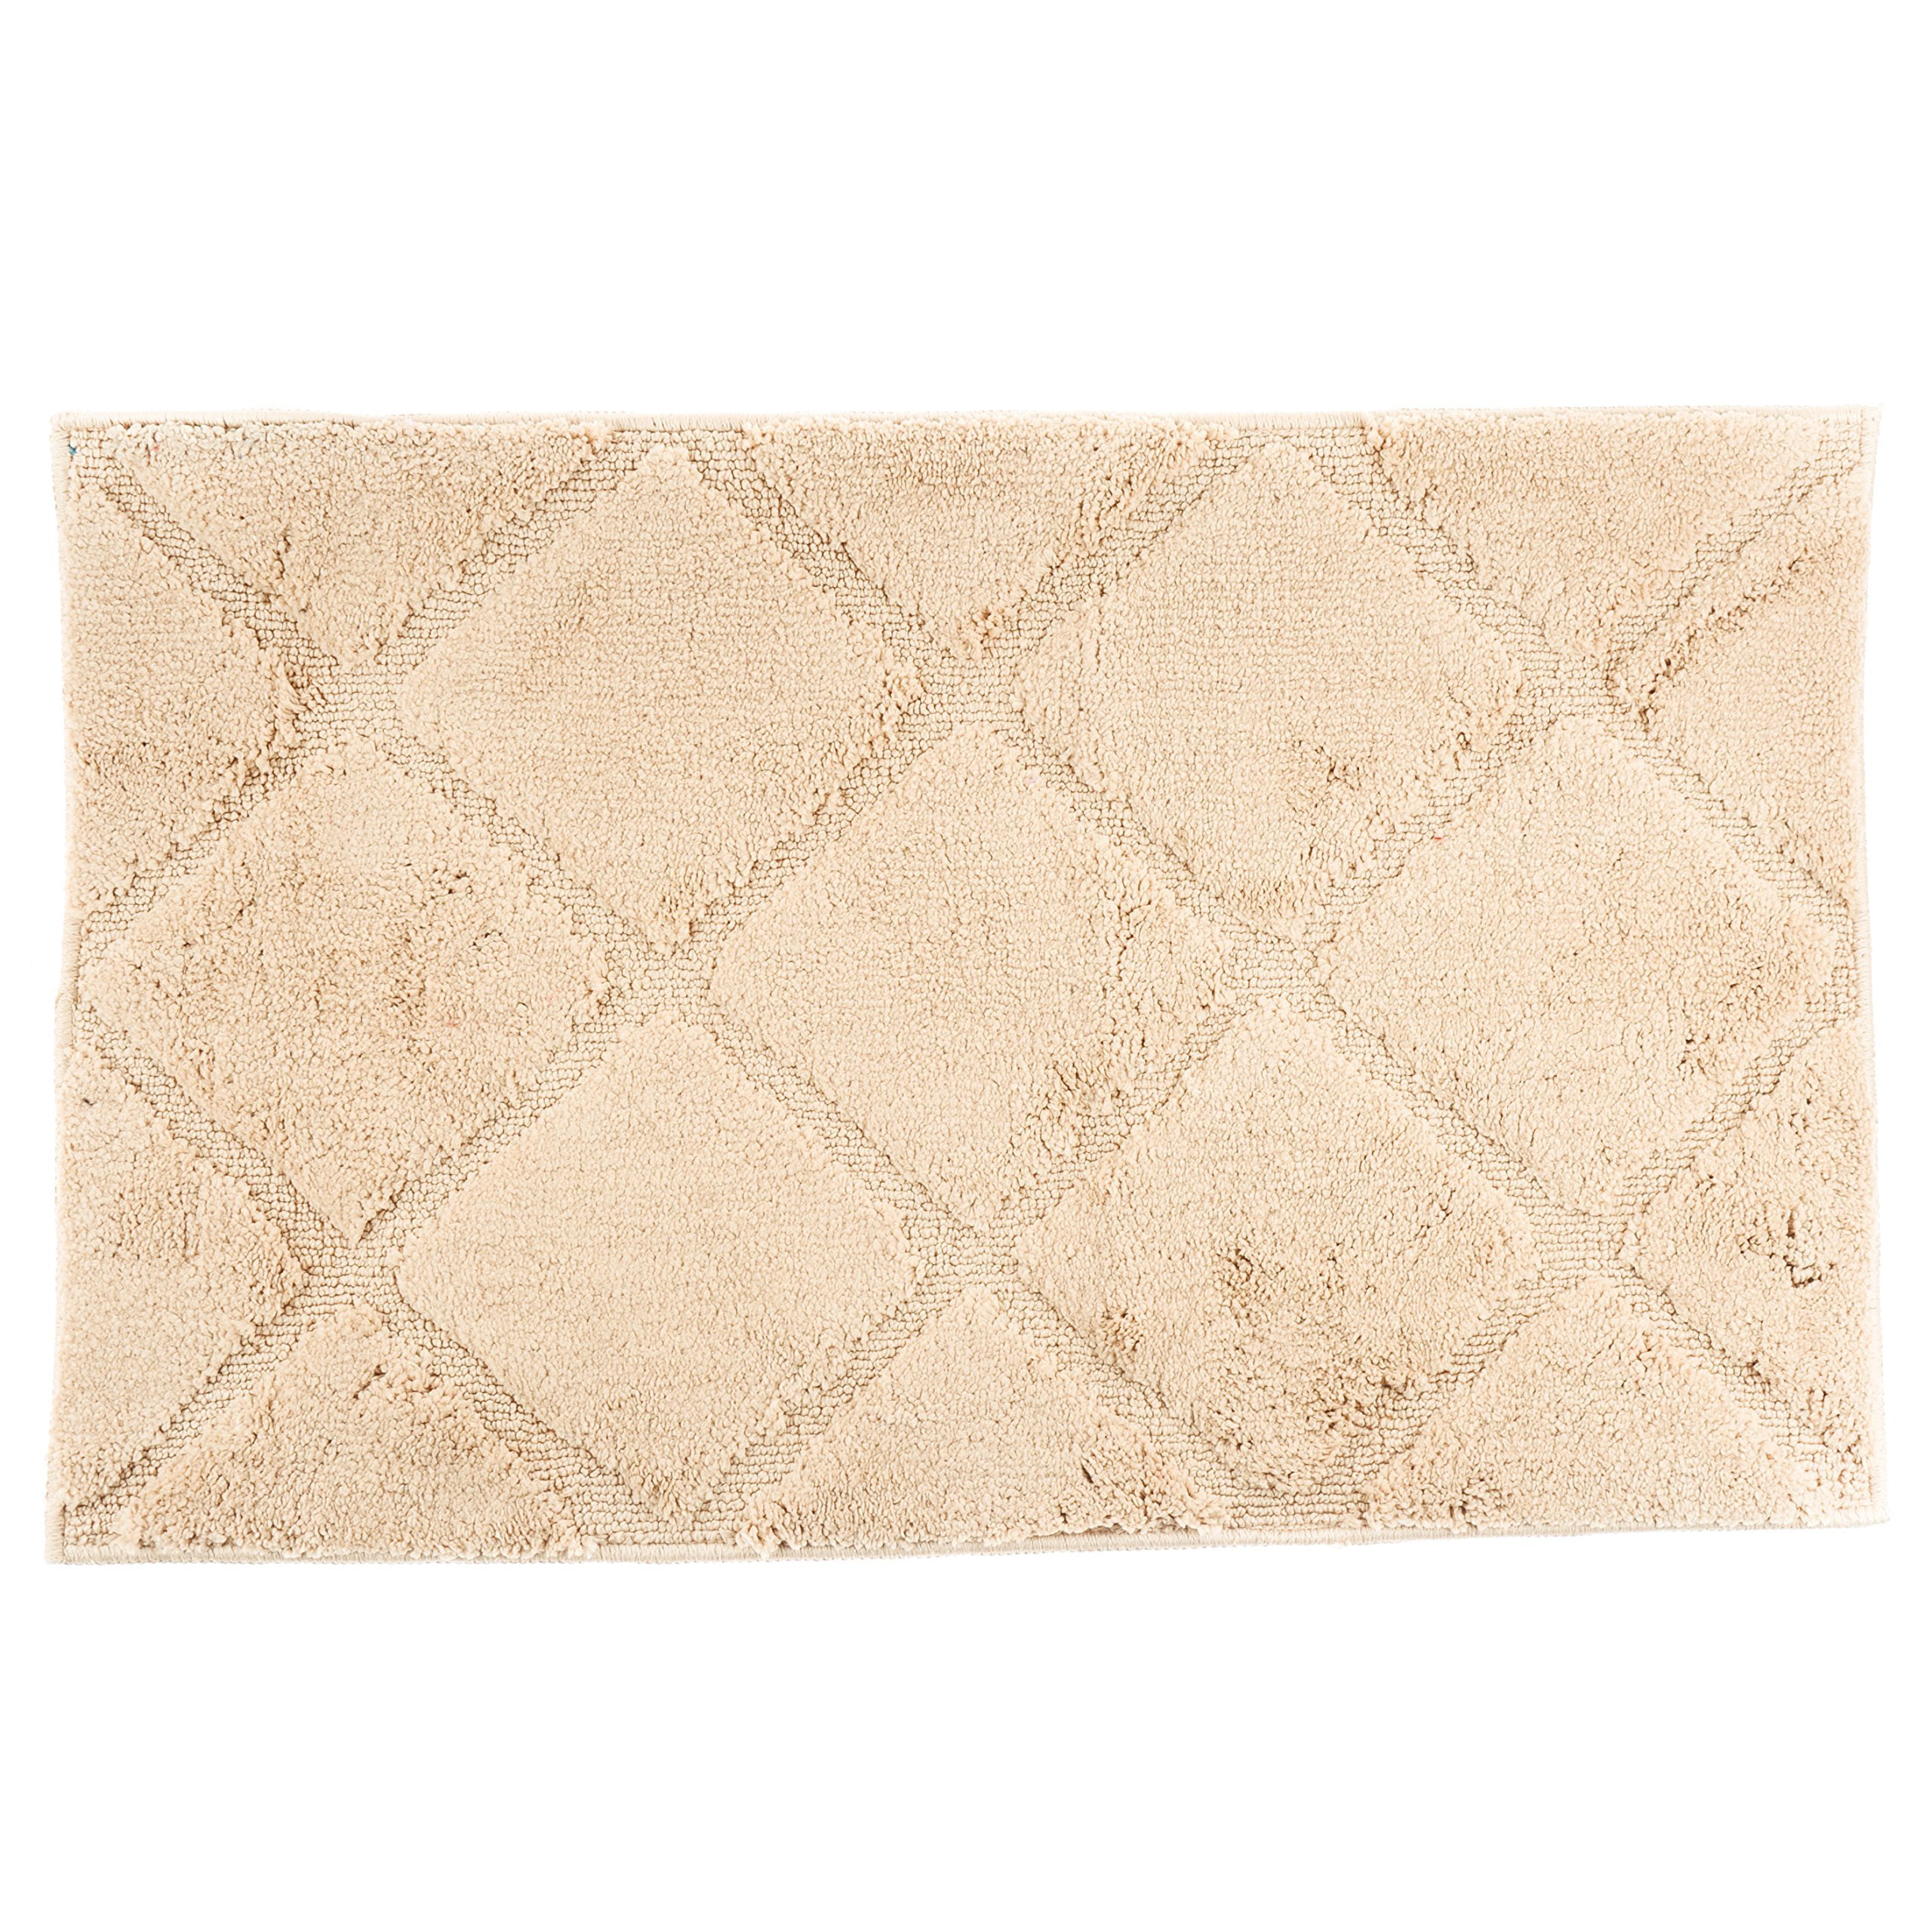 Details about  / Brand New Bathroom Mat White and Brown